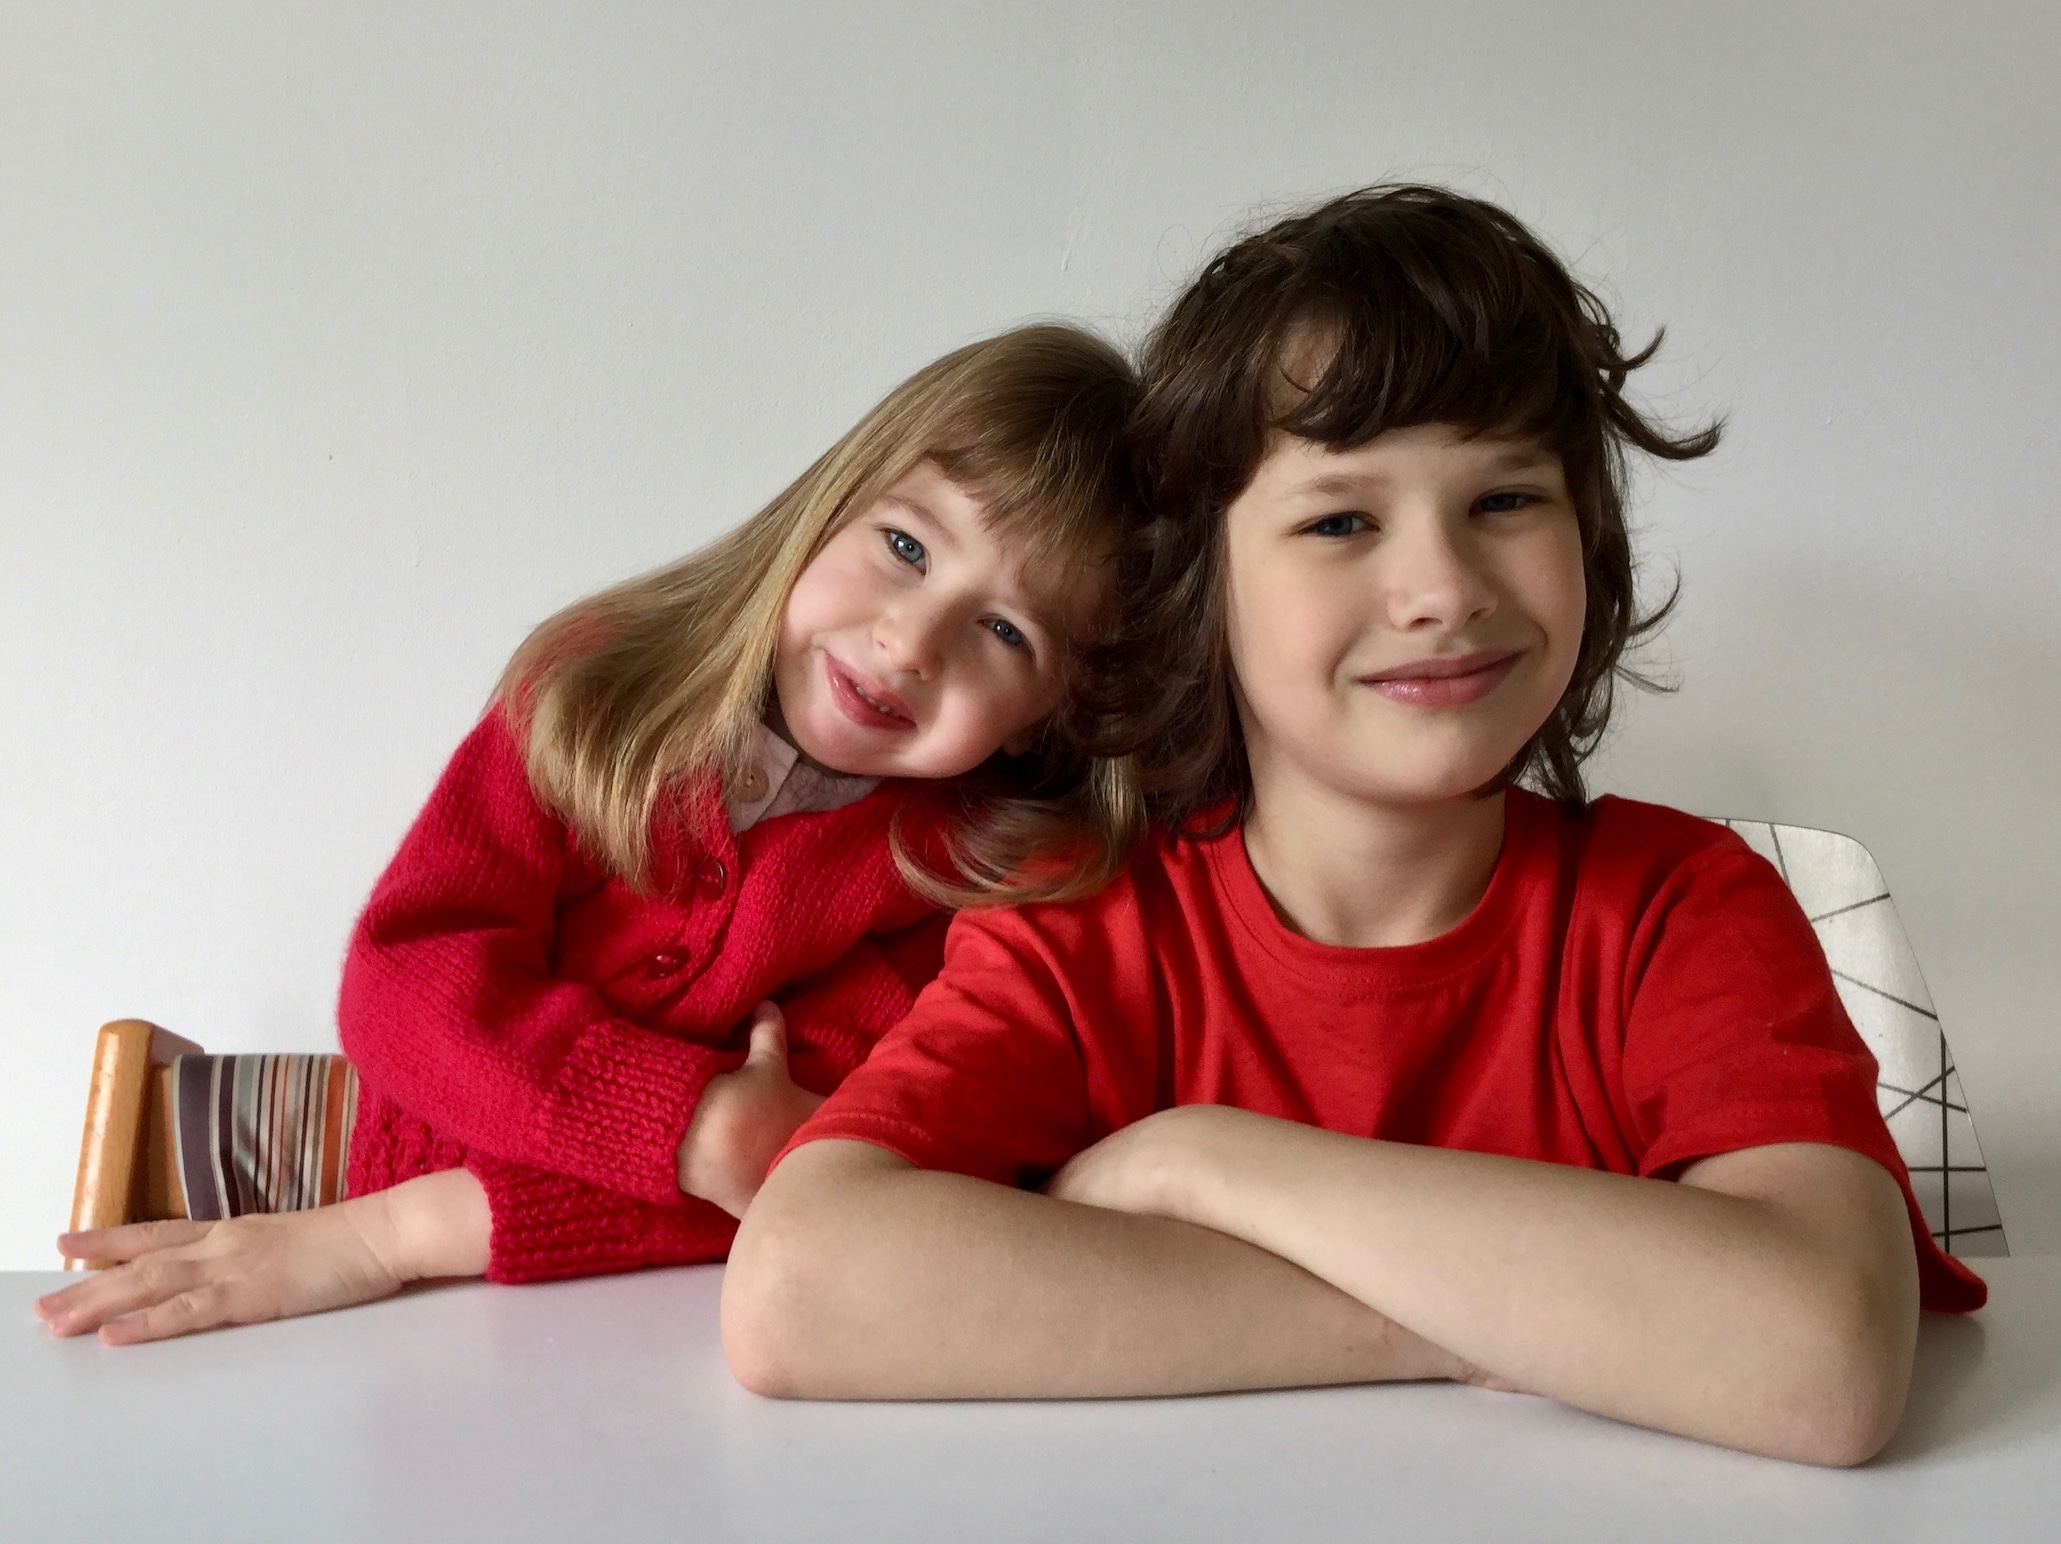 Eudora, a little girl with dirty blond hair wearing a read sweater, rests her head on her brother's shoulder, a boy with wispy dark brown hair wearing a read t-shirt.